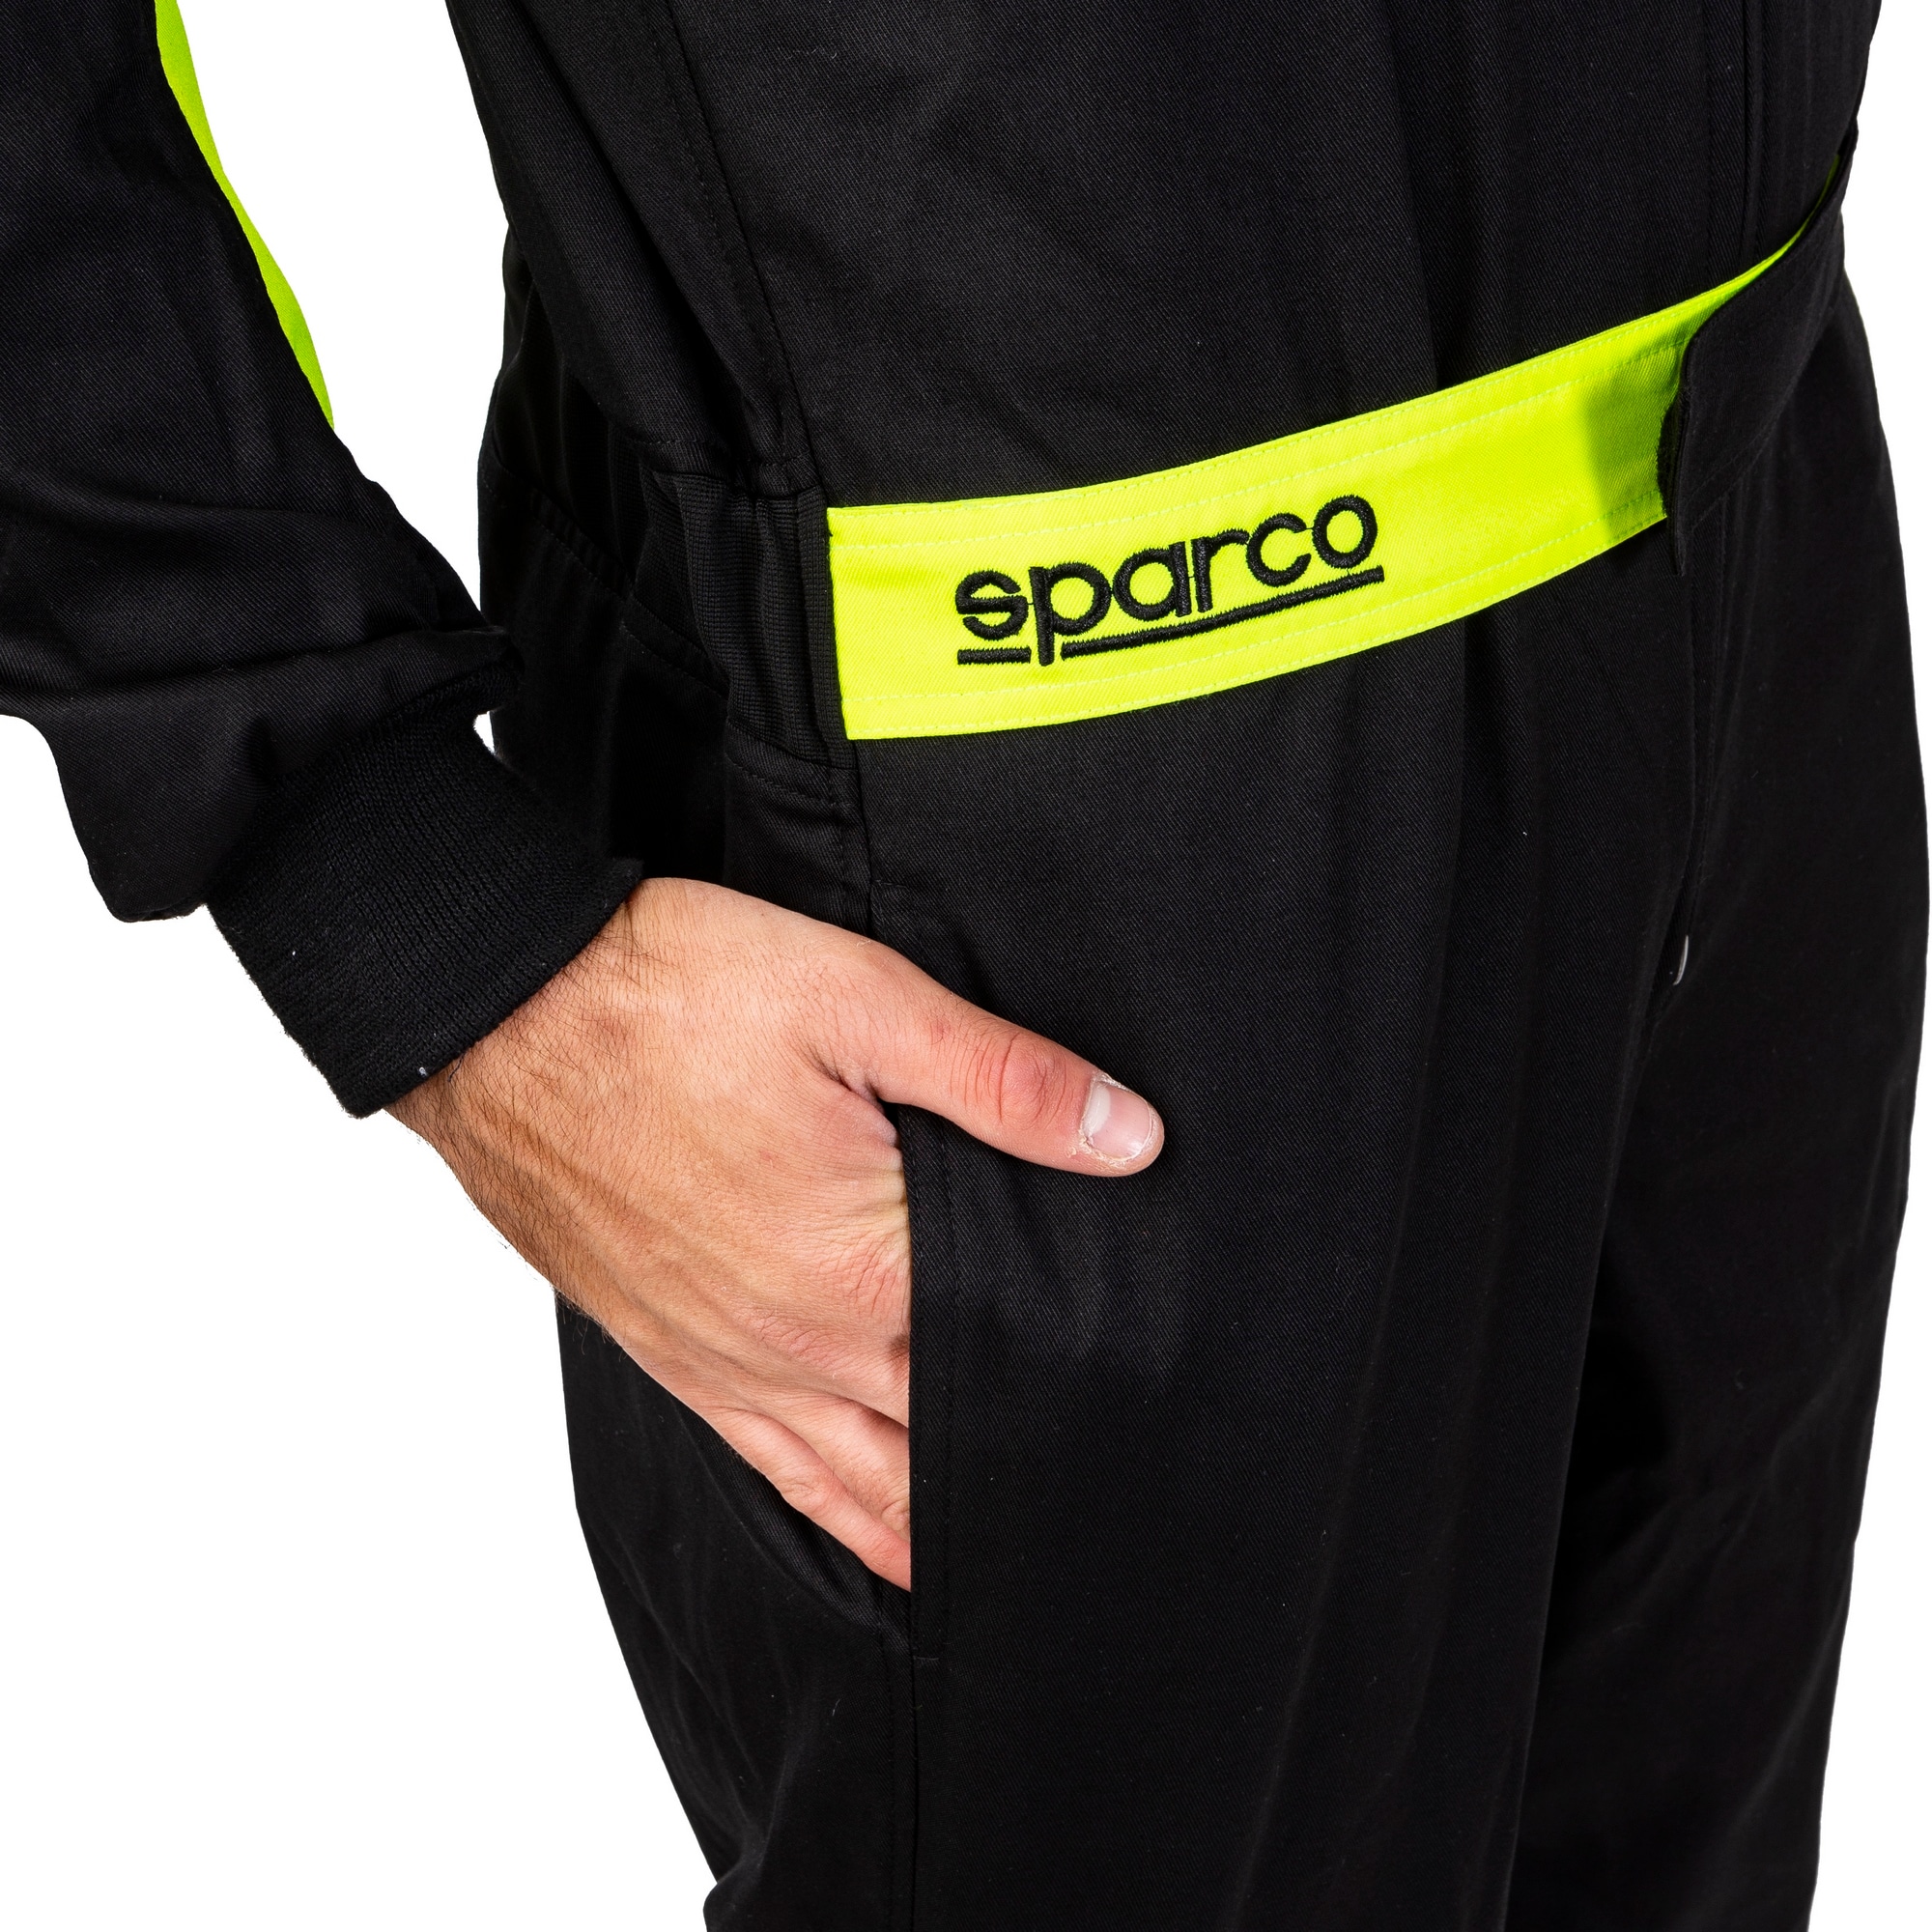 Karting Suit Sparco Rookie Black/Yellow